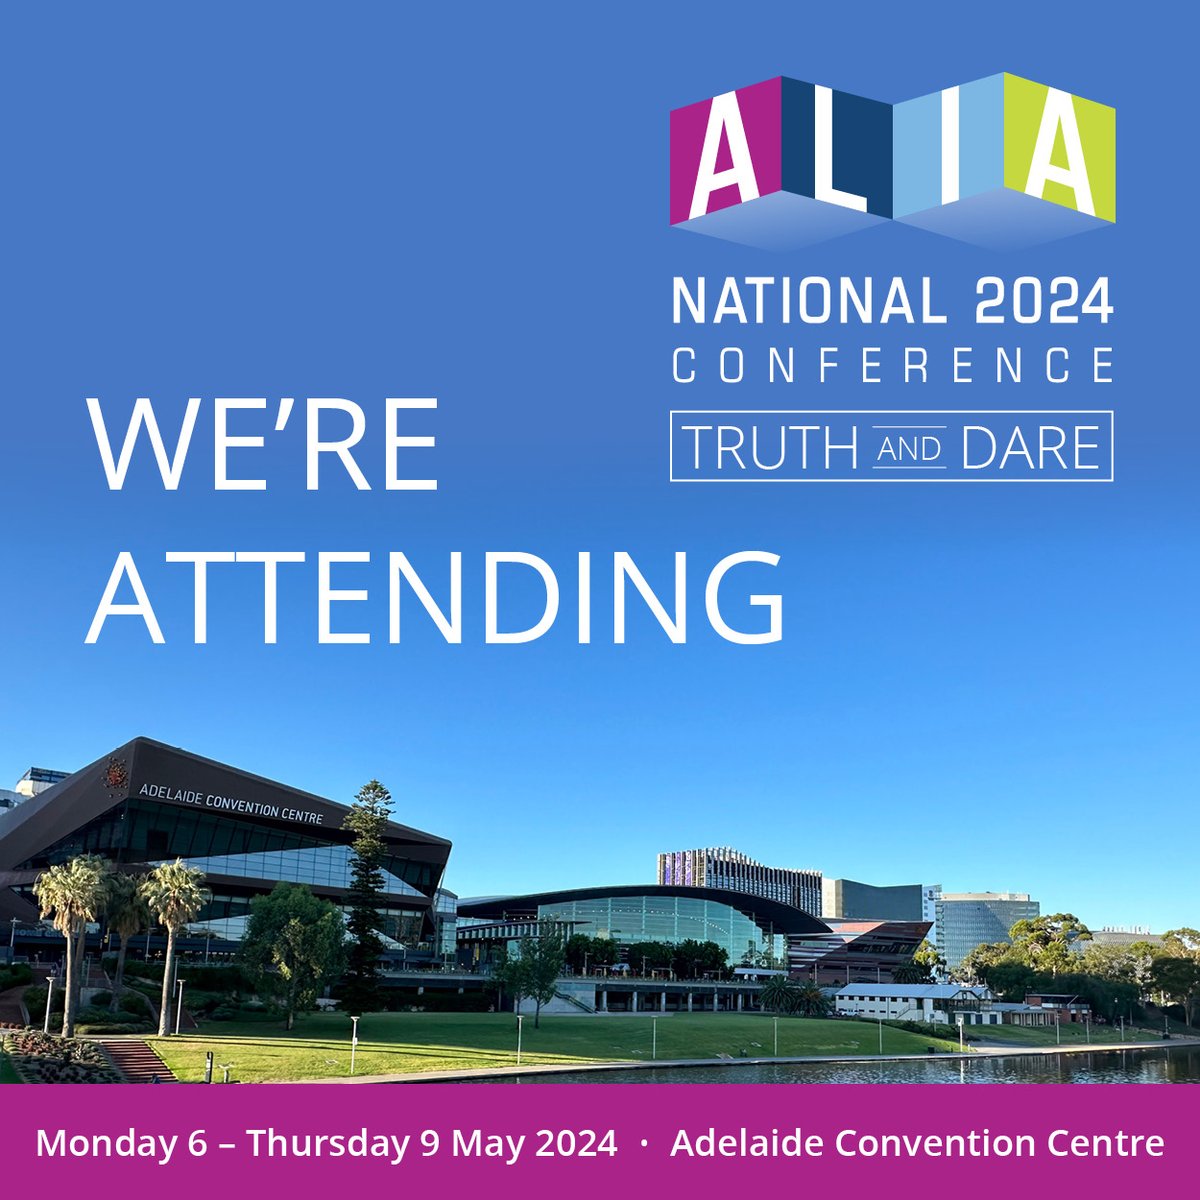 Are you an Australian publisher or creator with questions about our #LendingRights scheme? We’ll be at the @ALIANational National Conference in #Adelaide from 7-9 May to answer them and explain how we work closely libraries through the scheme ➡ tinyurl.com/ALIAconf2024